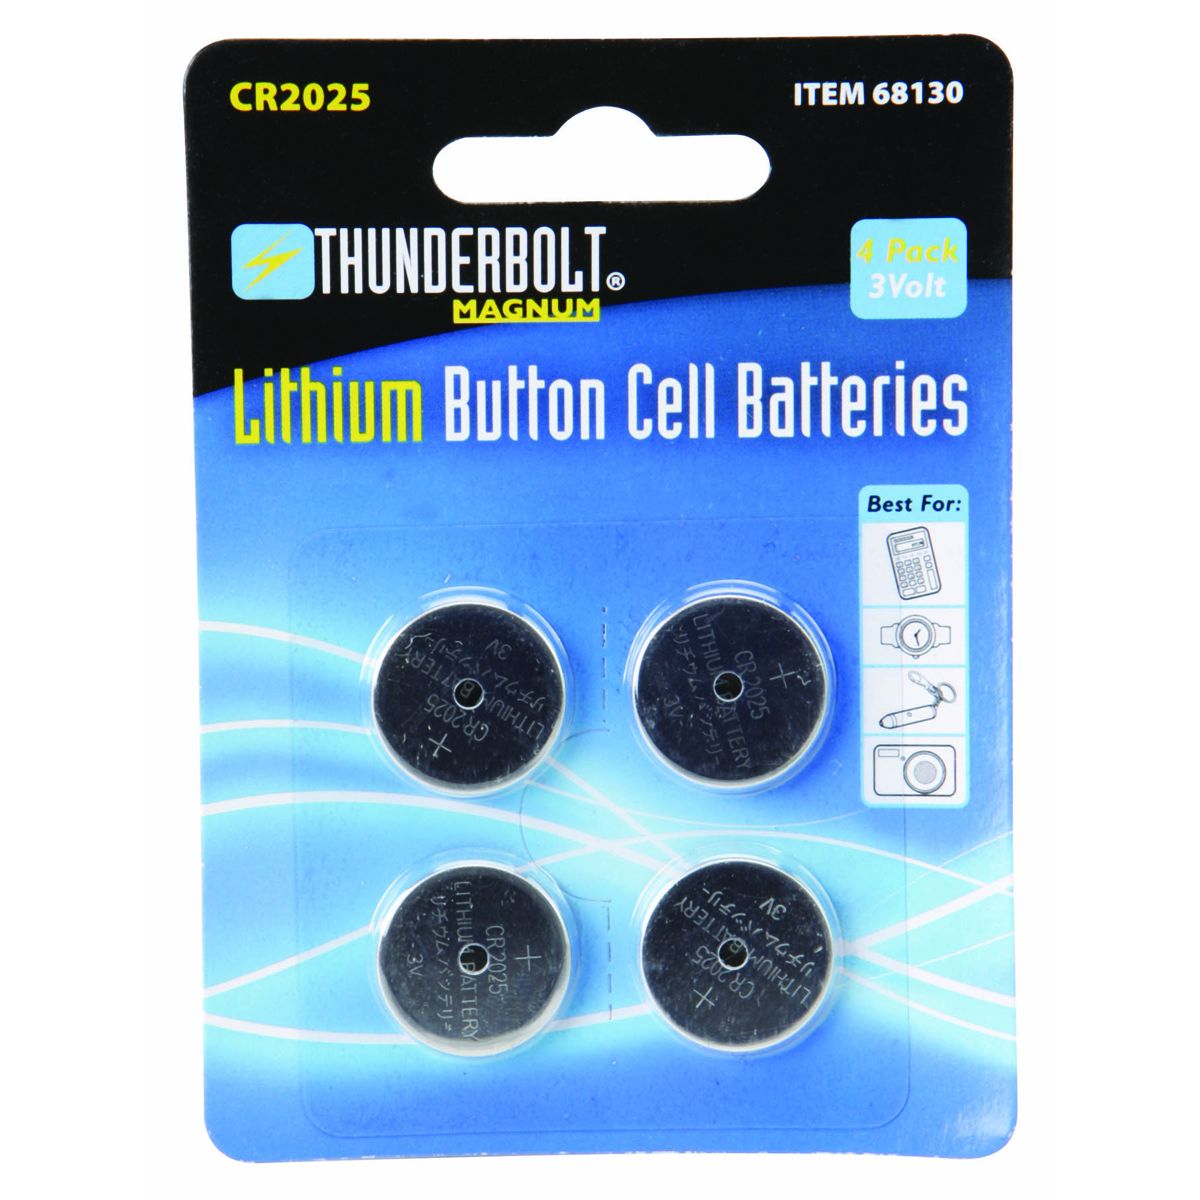 THUNDERBOLT MAGNUM CR2025 Lithium Button Cell Batteries, 4 Pack